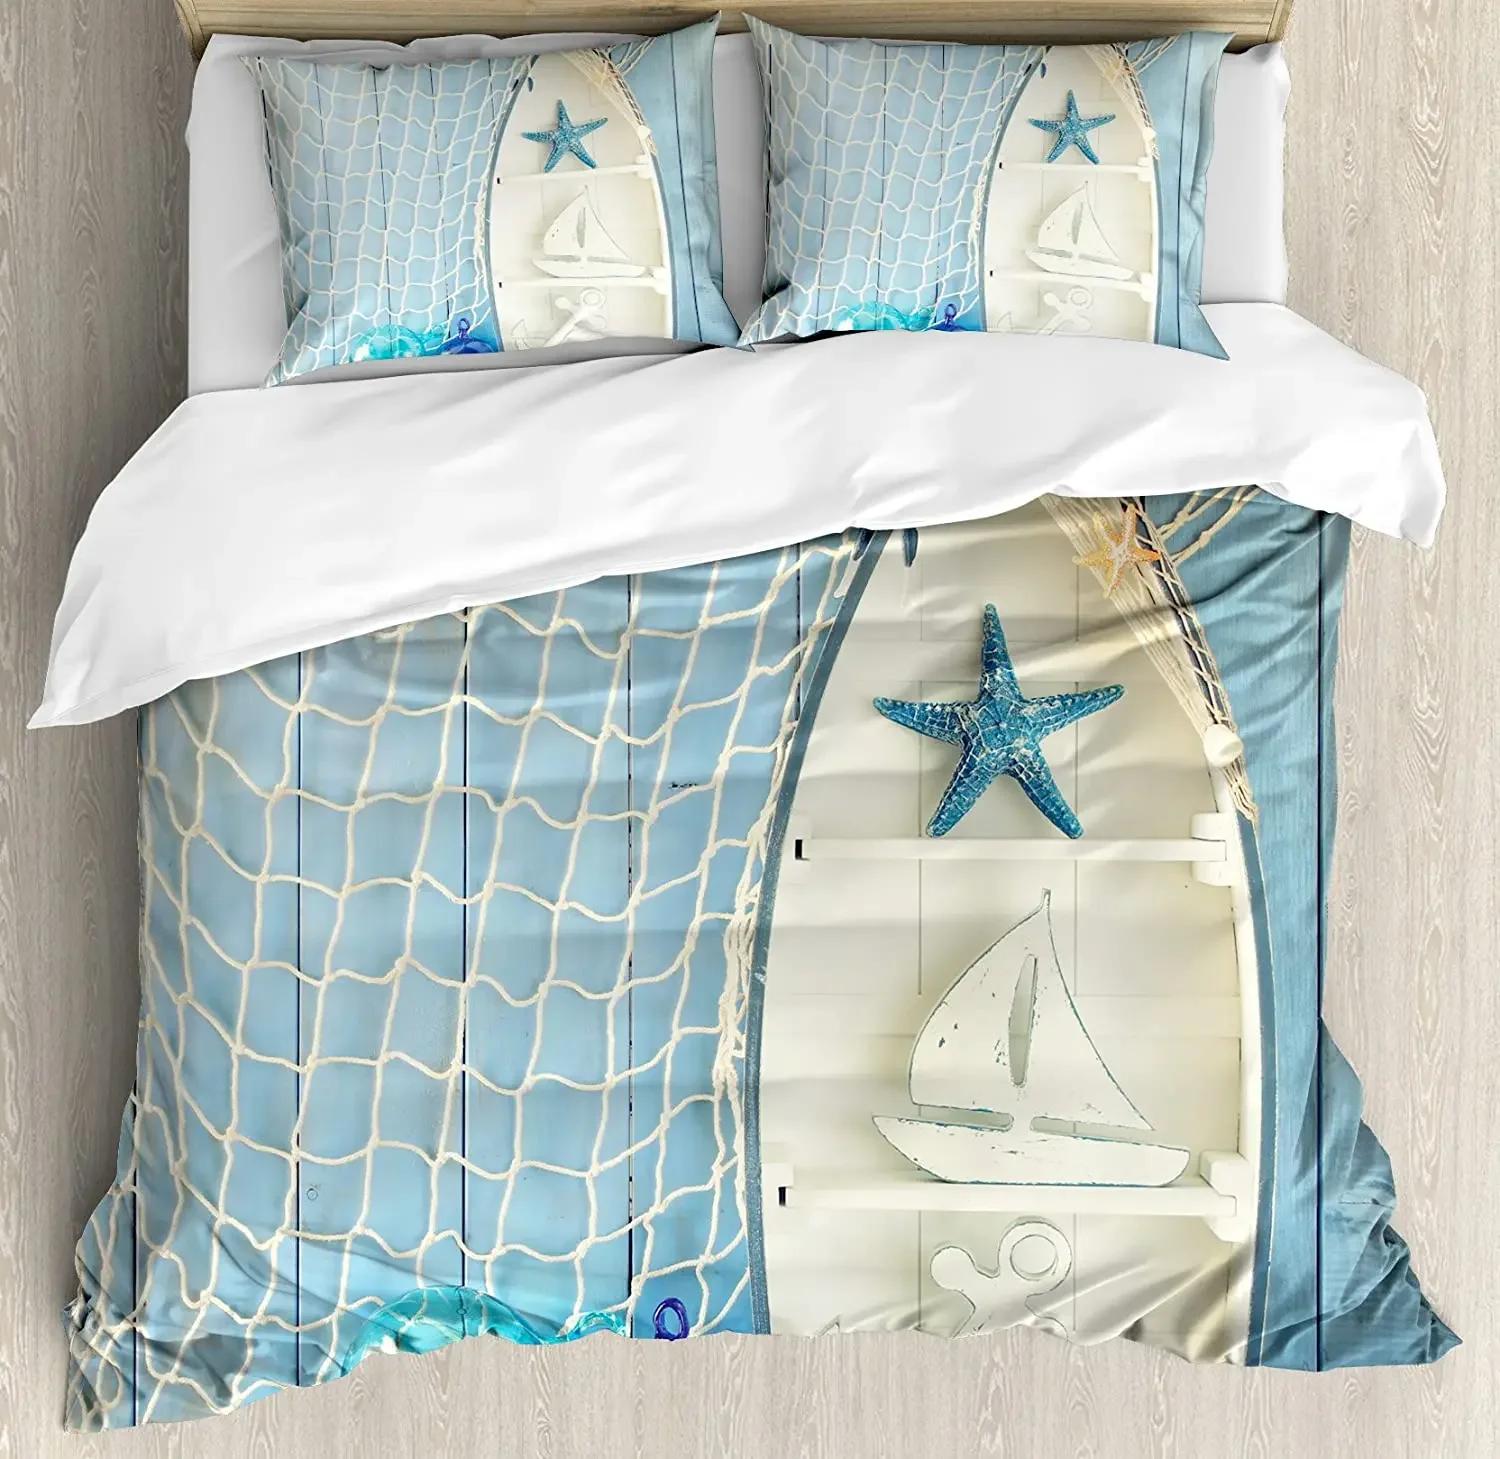 Nautical Bedding Set For Bedroom Bed Home Sea Objects on Wooden BackdropVintage Boa Duvet Cover Quilt Cover And Pill